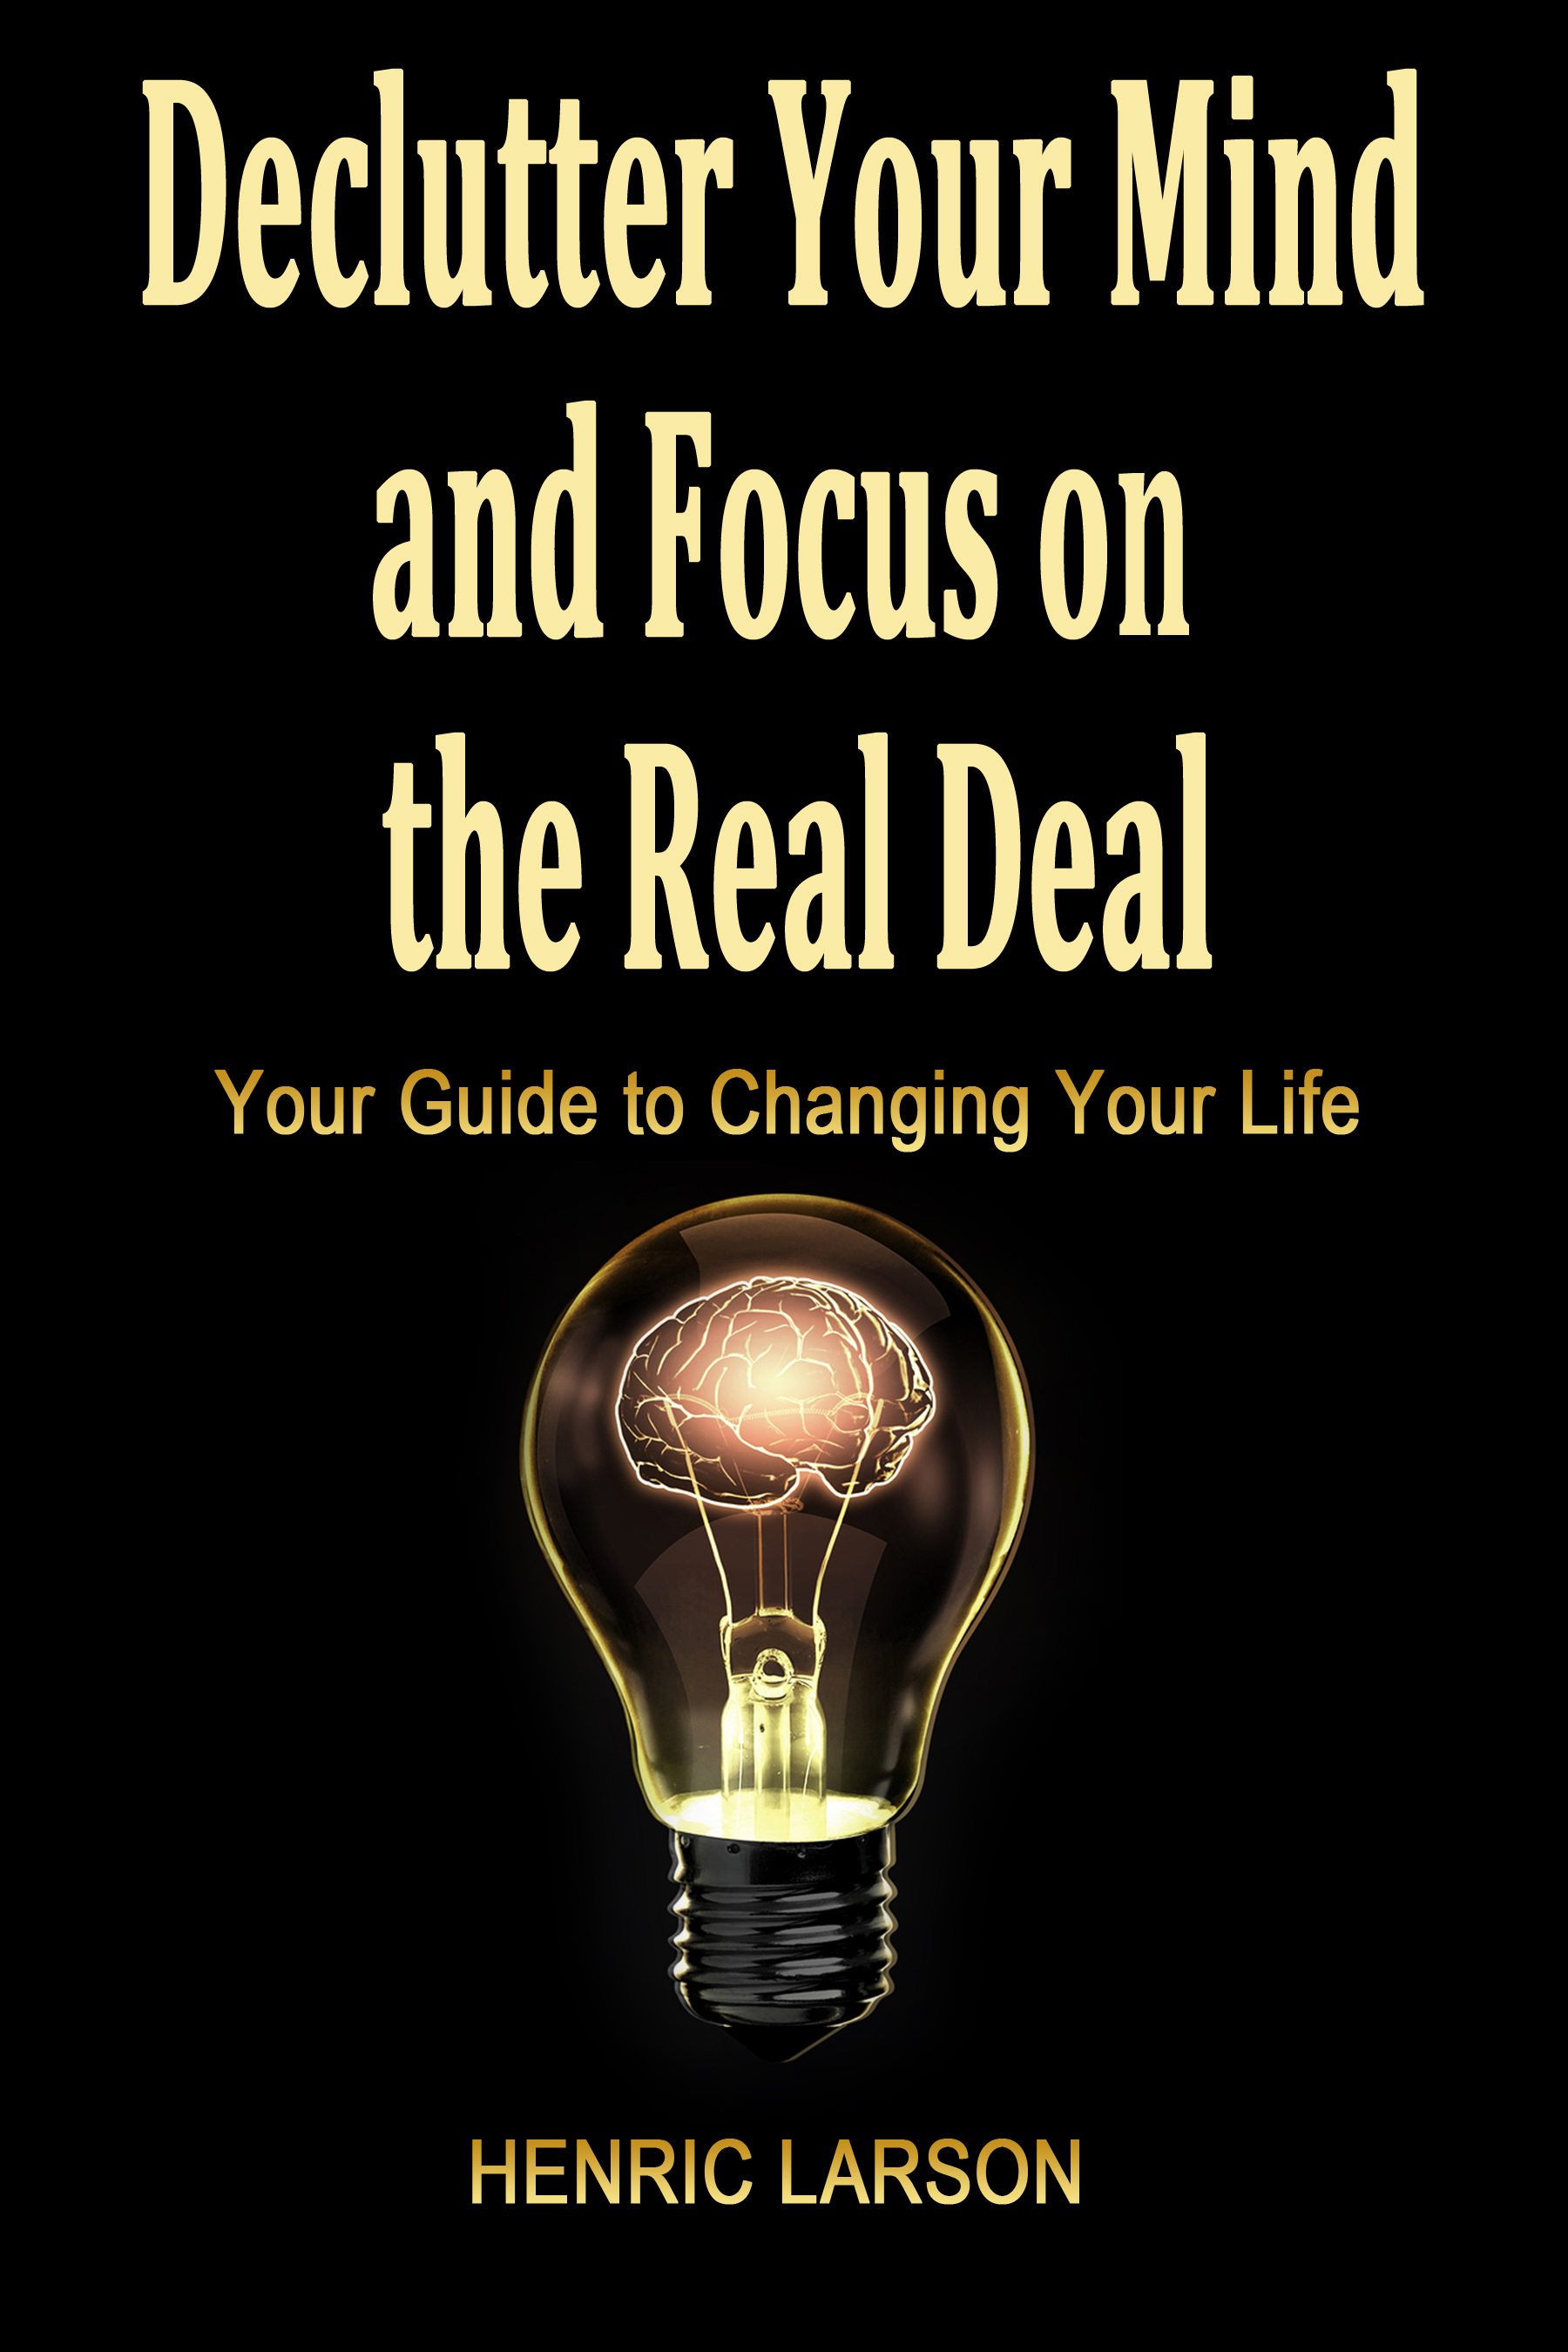 FREE: Declutter Your Mind and Focus on the Real Deal: Your Guide to Changing Your Life by Henrik Larson